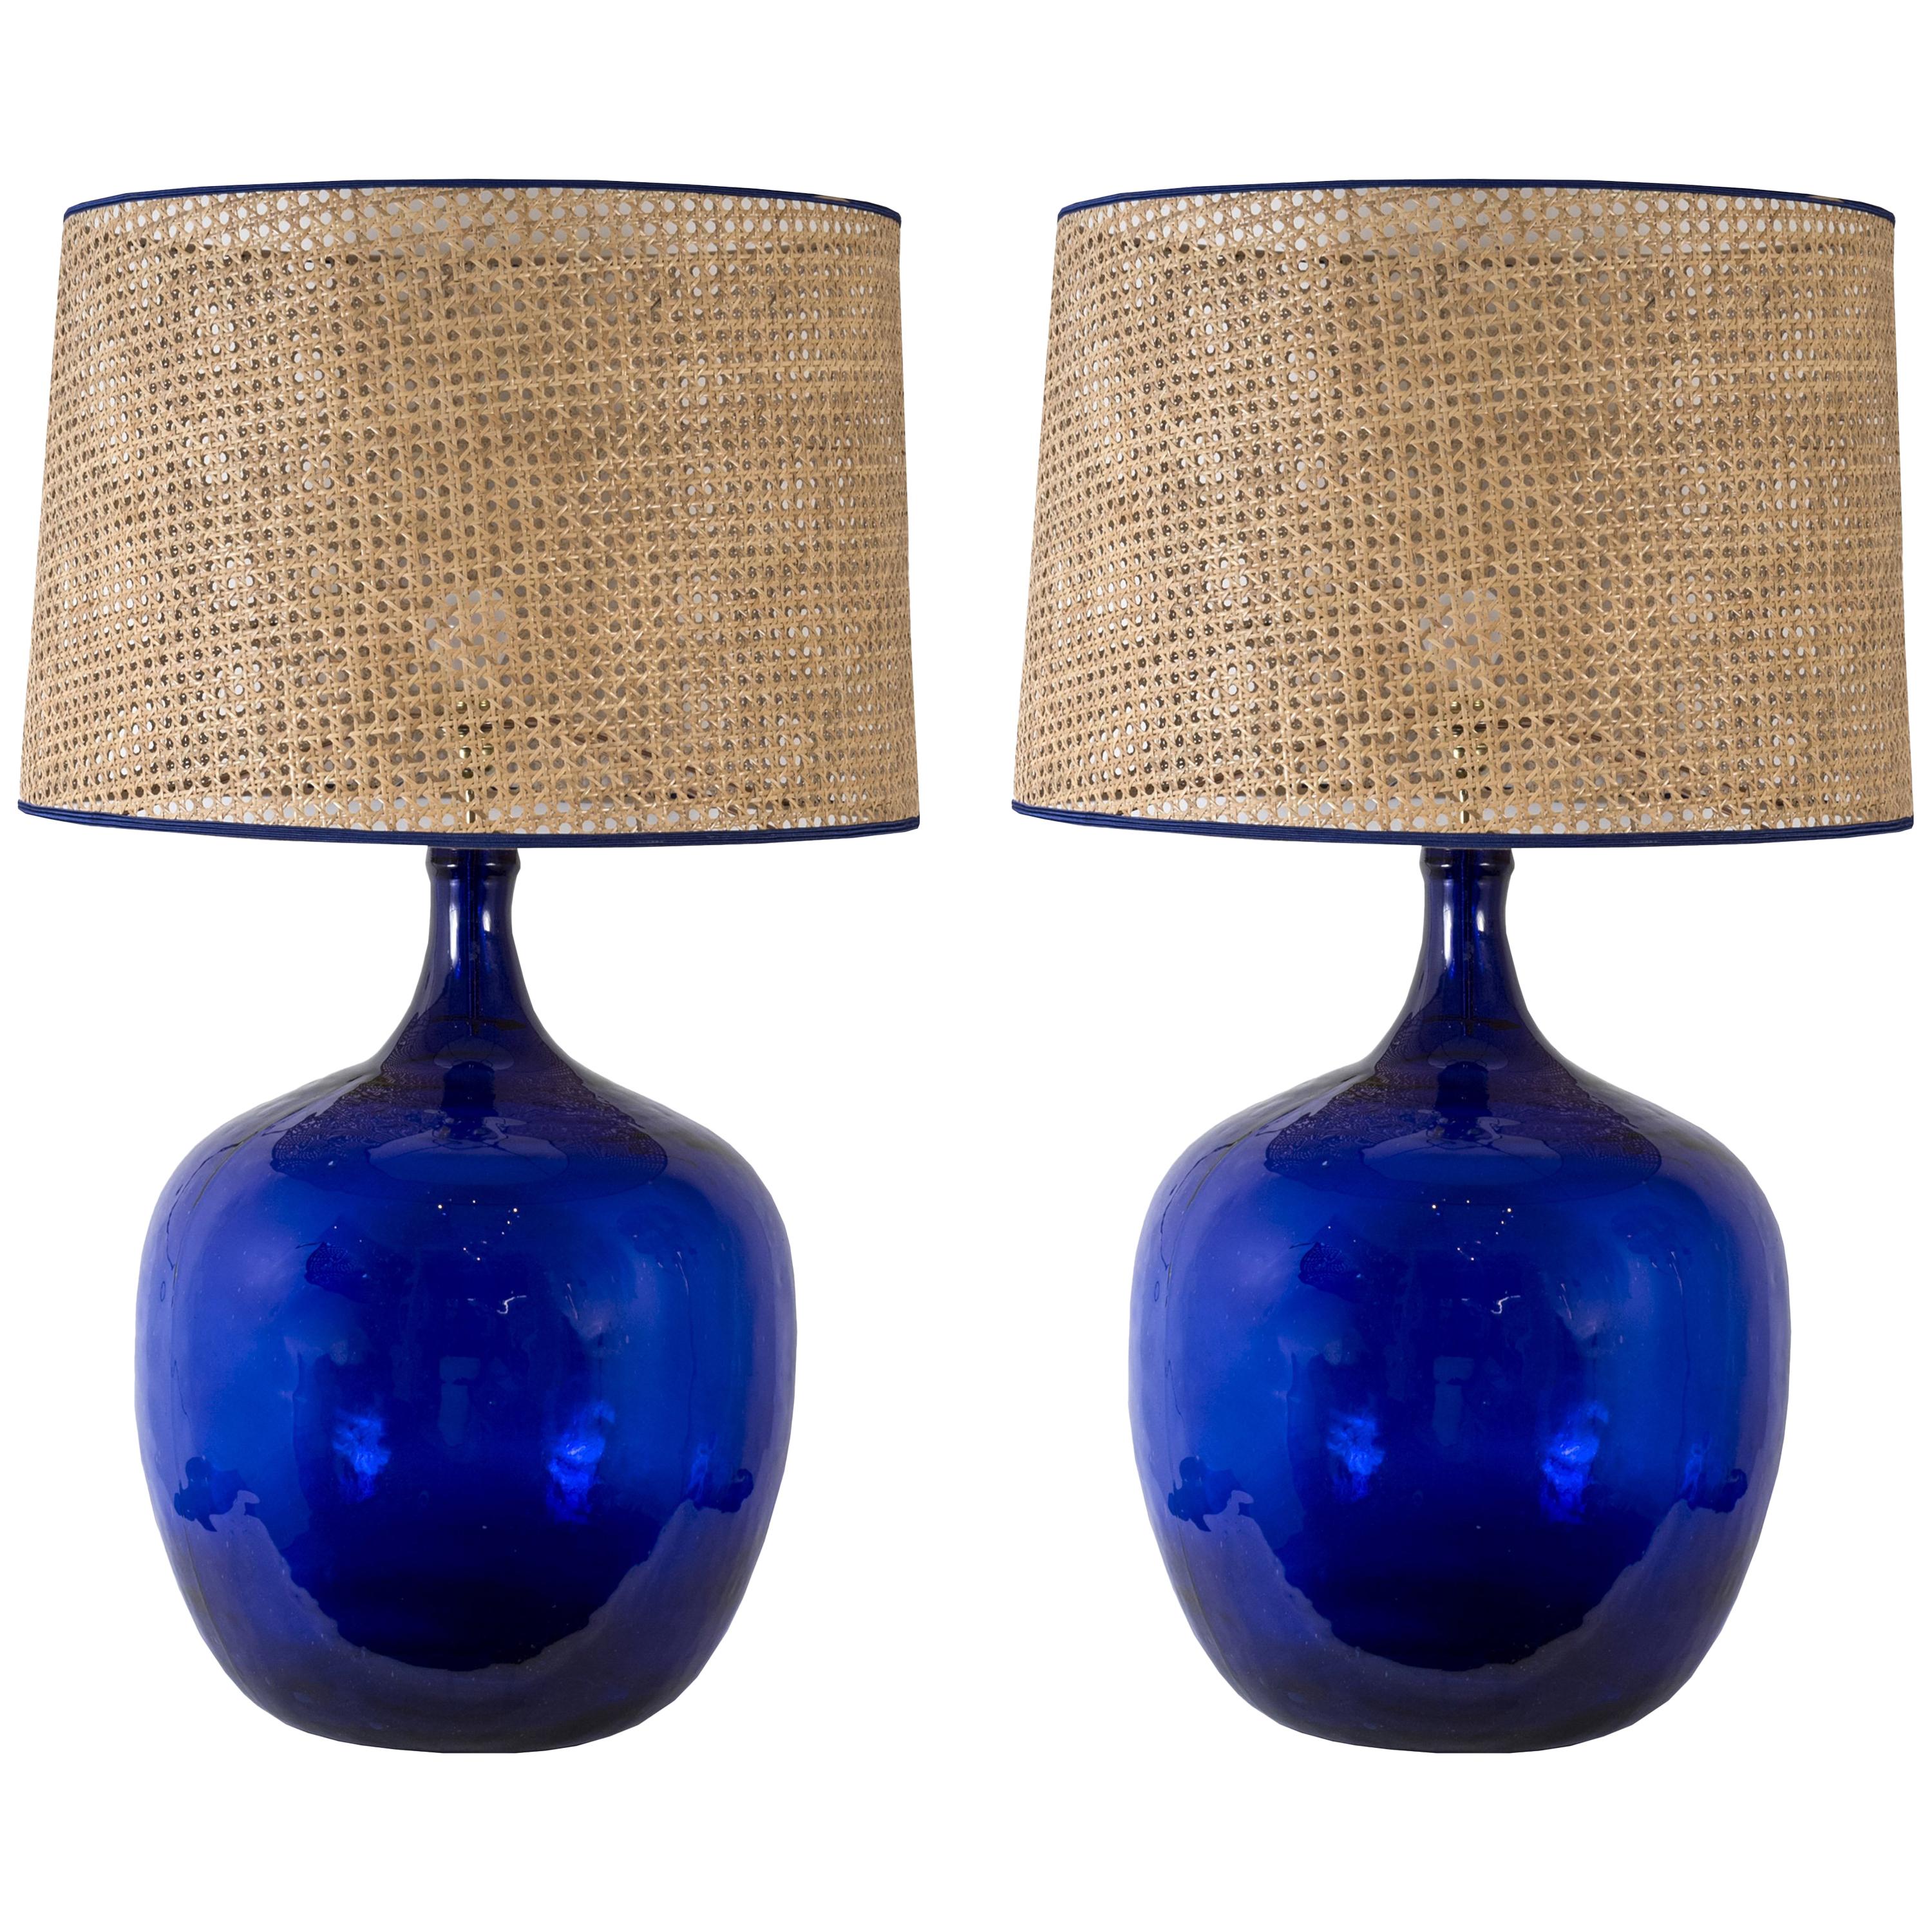 Huge Pair of Blue Glass Lamps